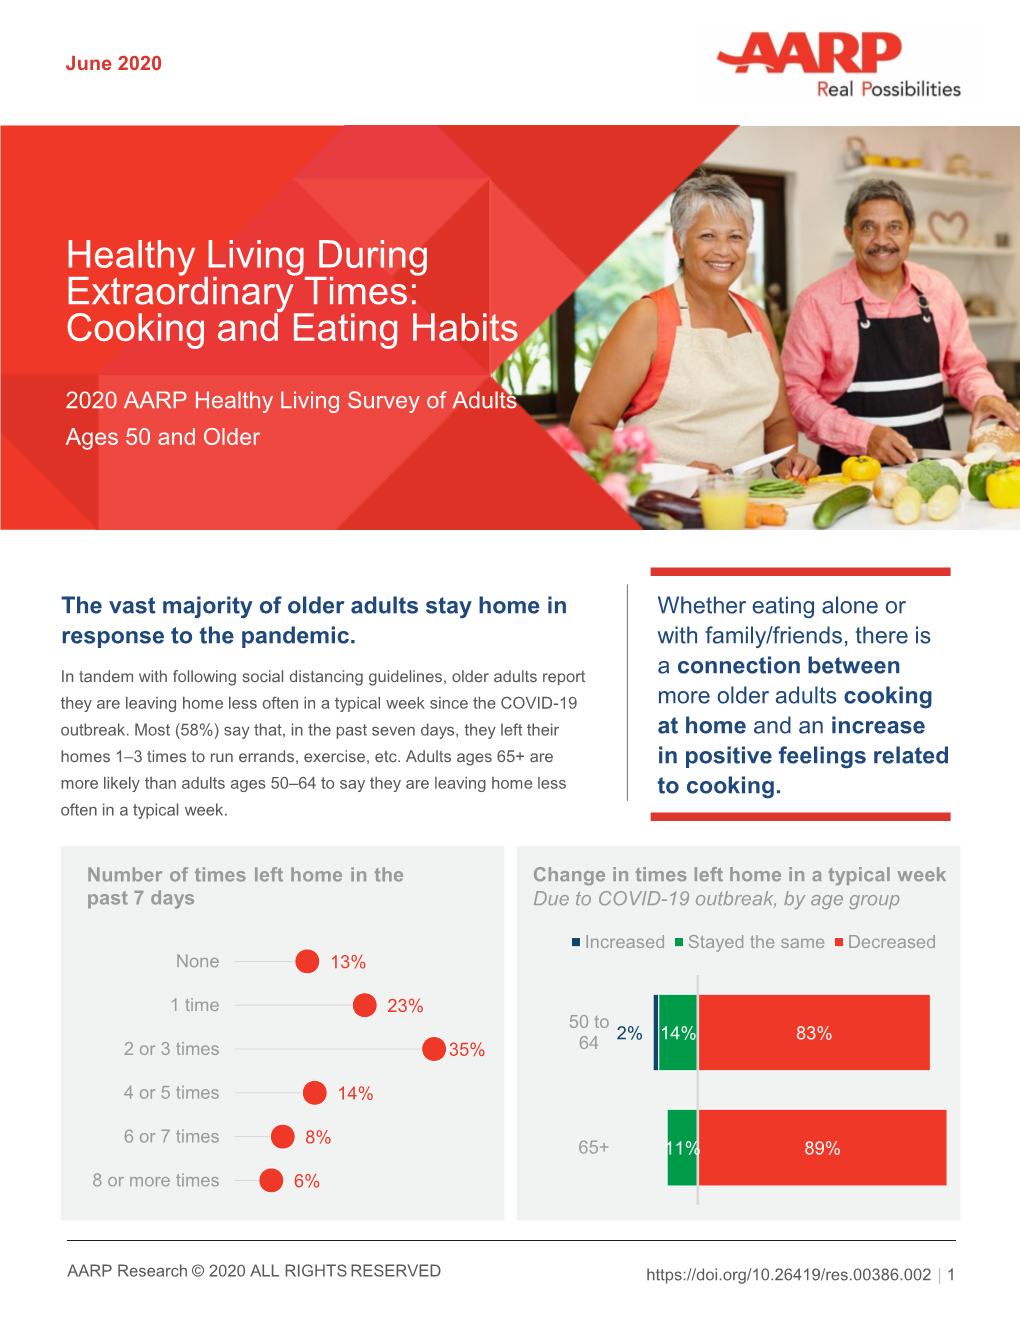 Healthy Living During Extraordinary Times: Cooking and Eating Habits